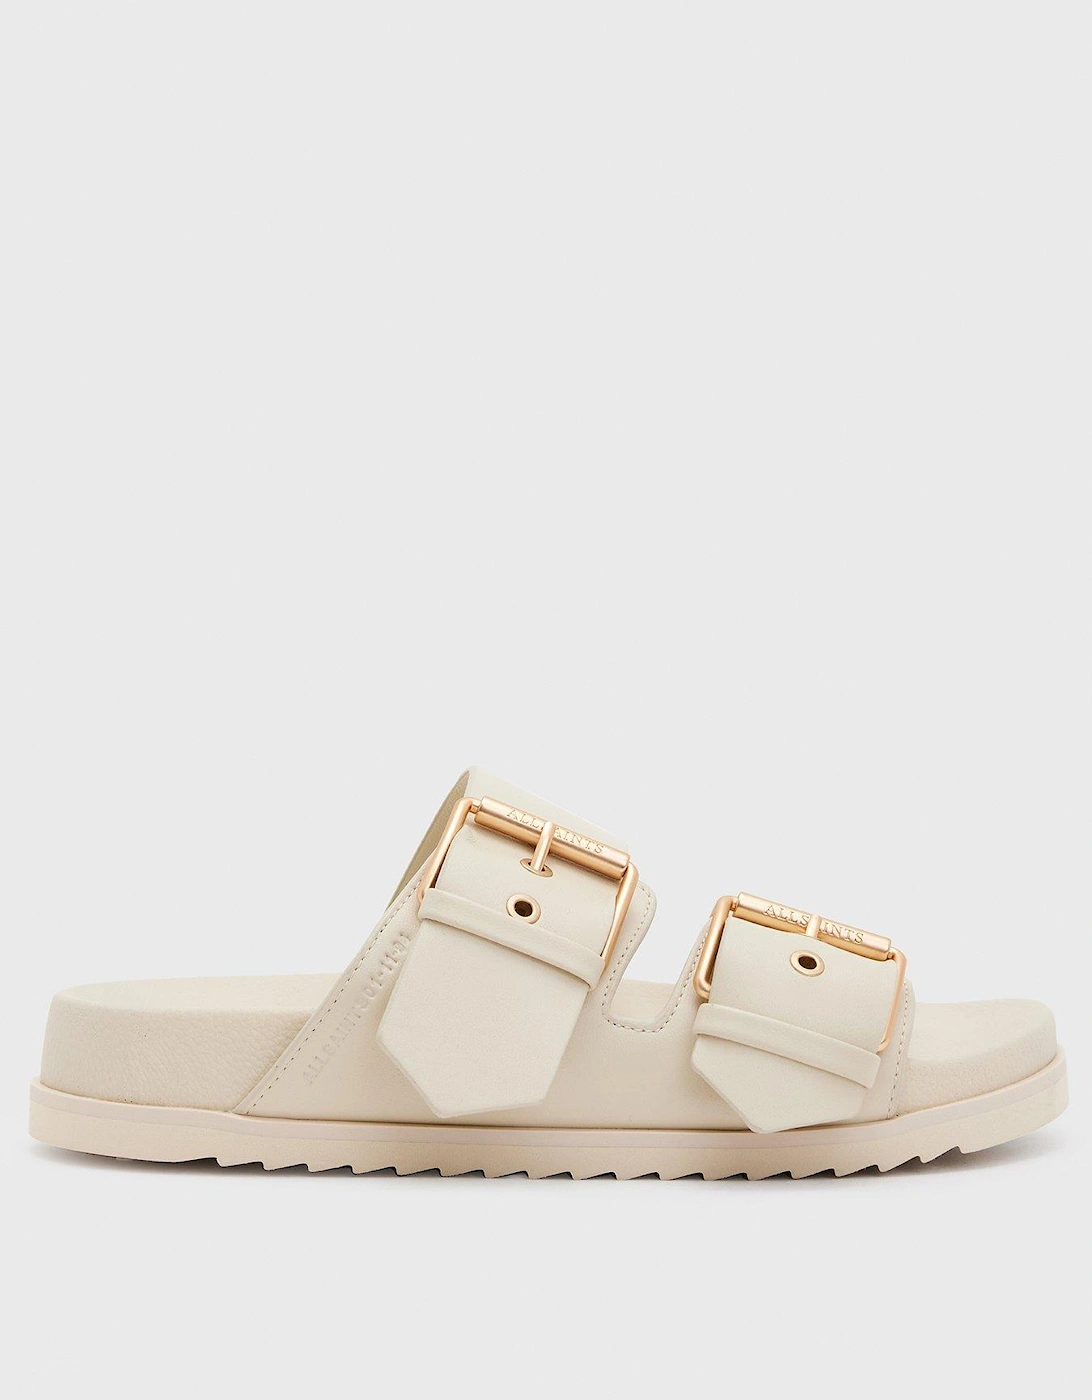 Sian Sandals - White, 8 of 7